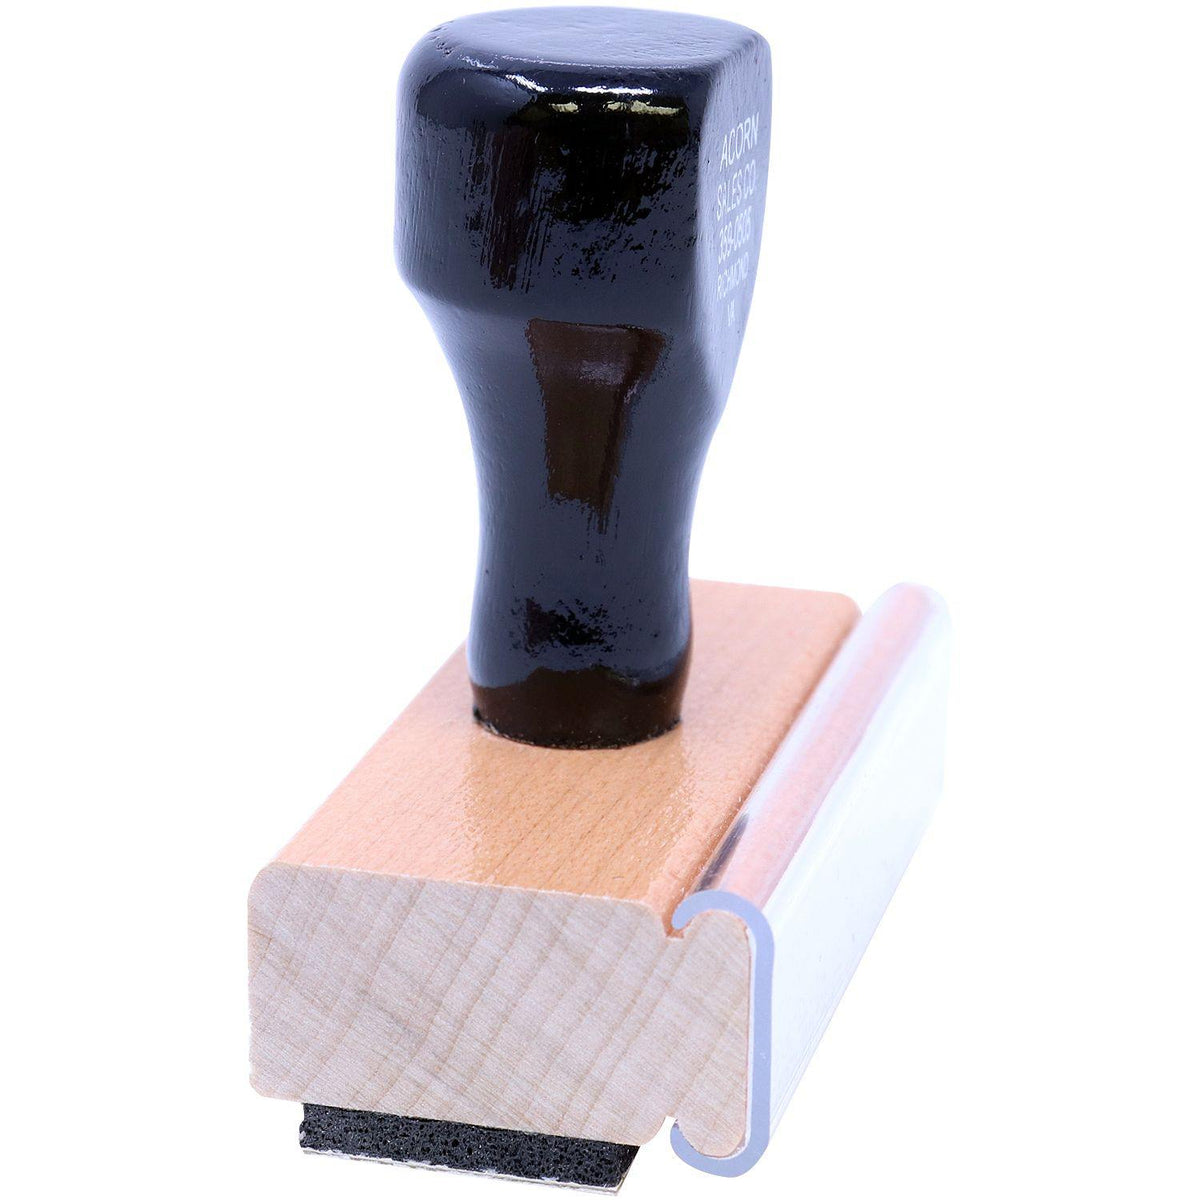 Side View of Large Bc Bs Rubber Stamp at an Angle